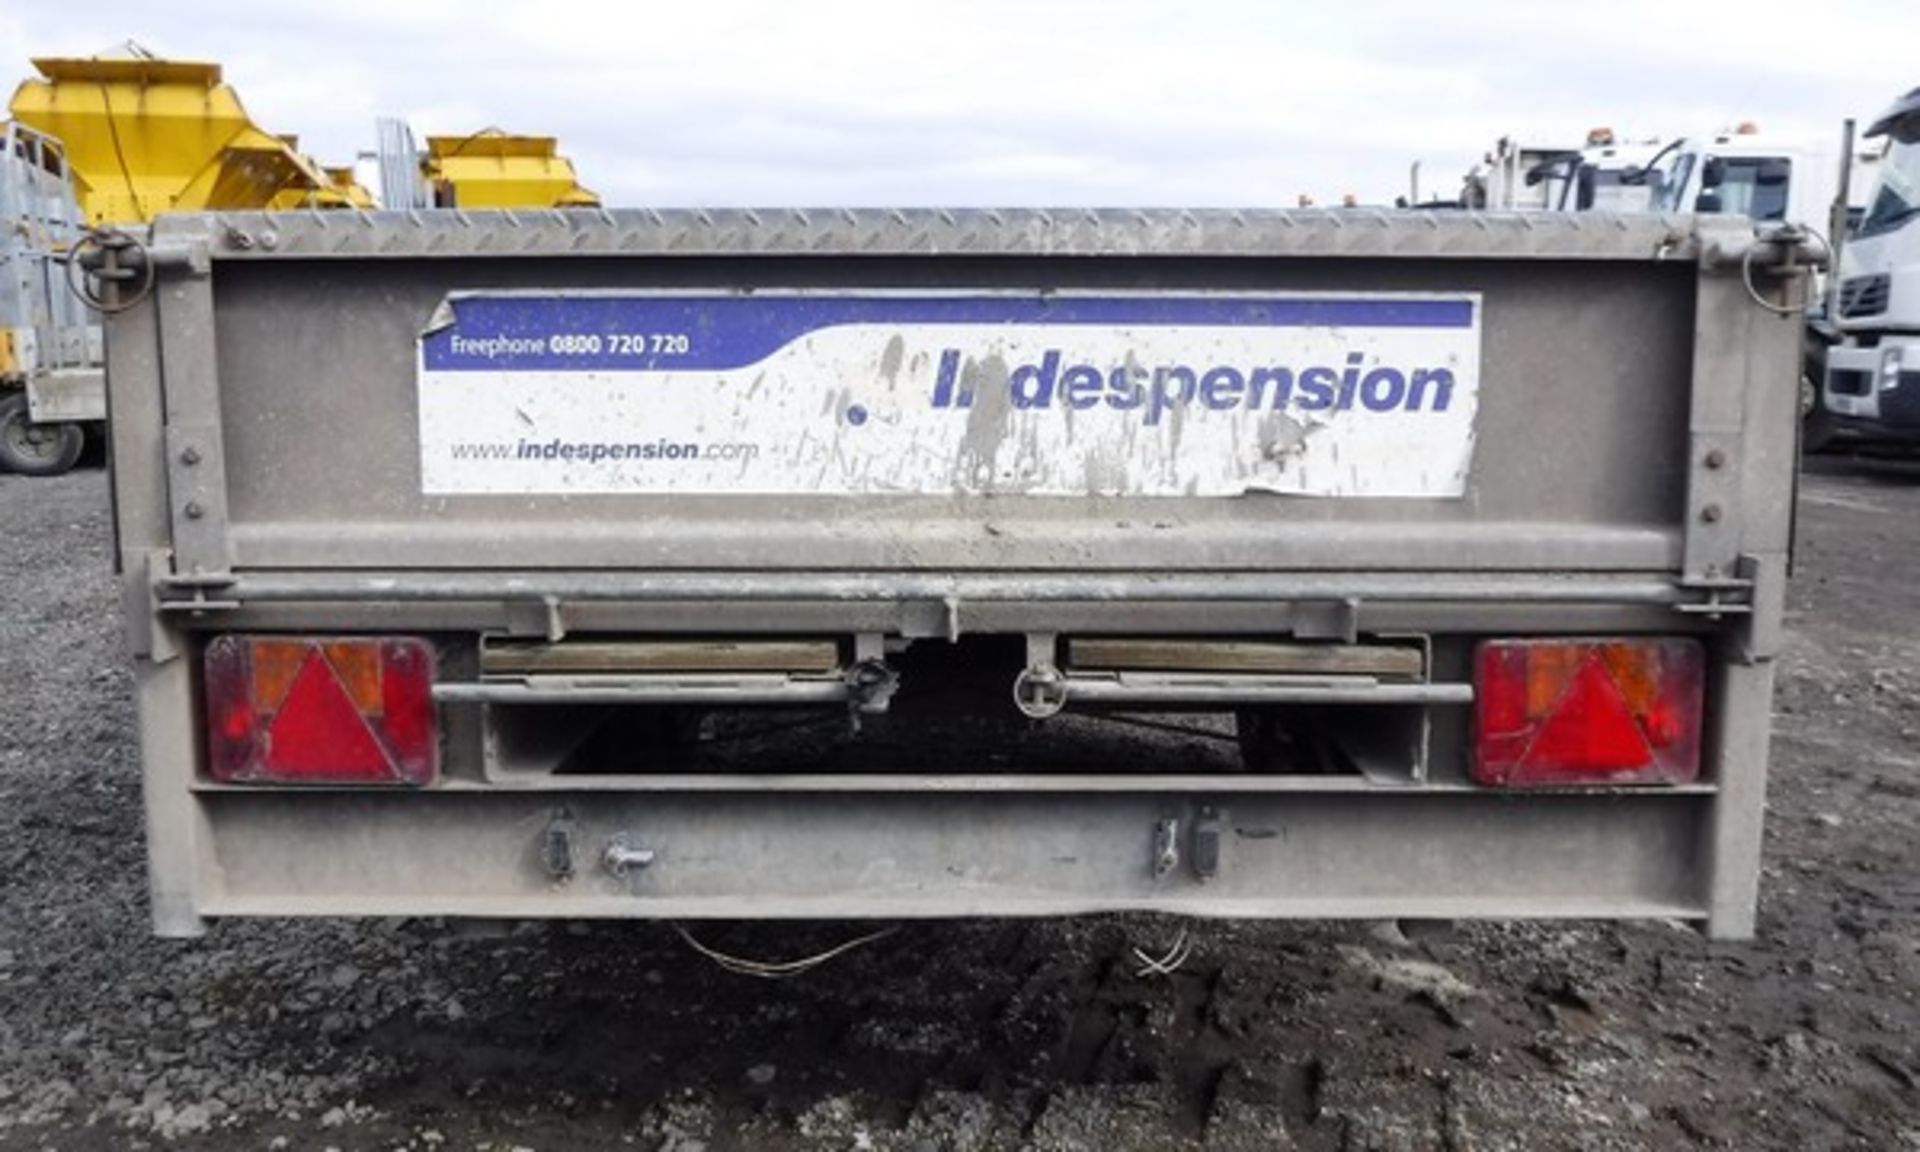 INDESPENSION TRAILER, 10FT X 5FT, WITH RAMPS, ASSET - 758-4028 - Image 3 of 5